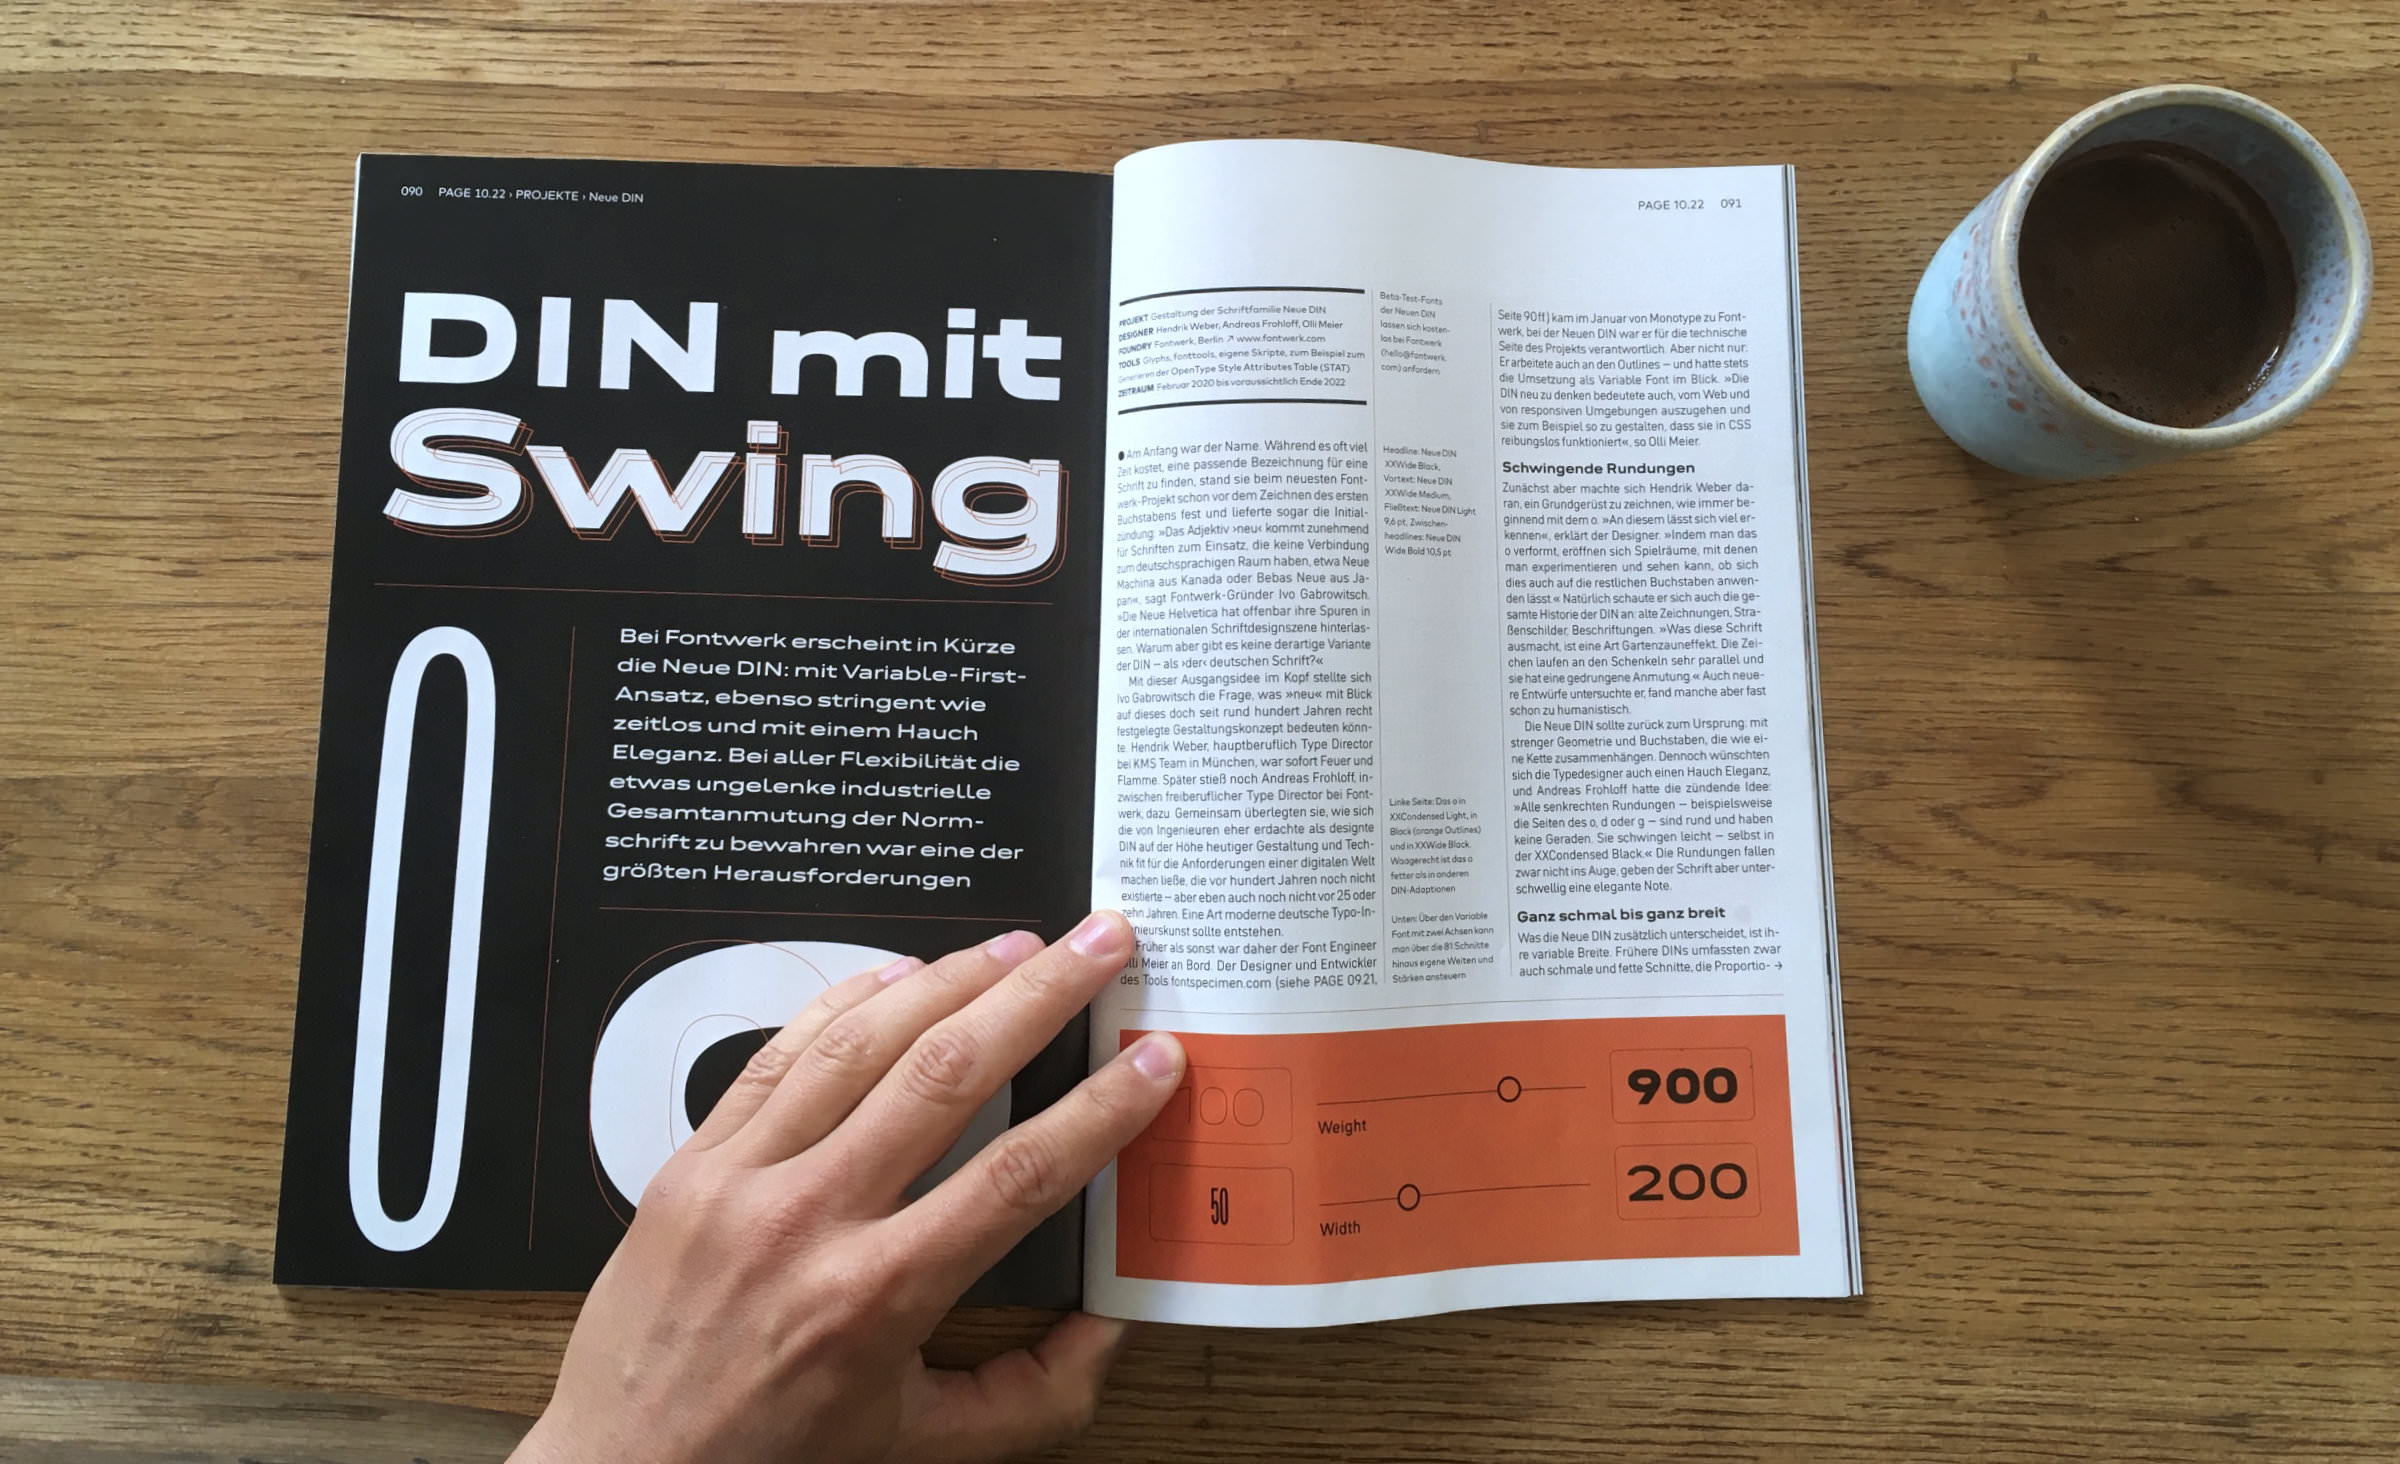 PAGE (10.2022) includes a full in-depth five-page feature about Neue DIN